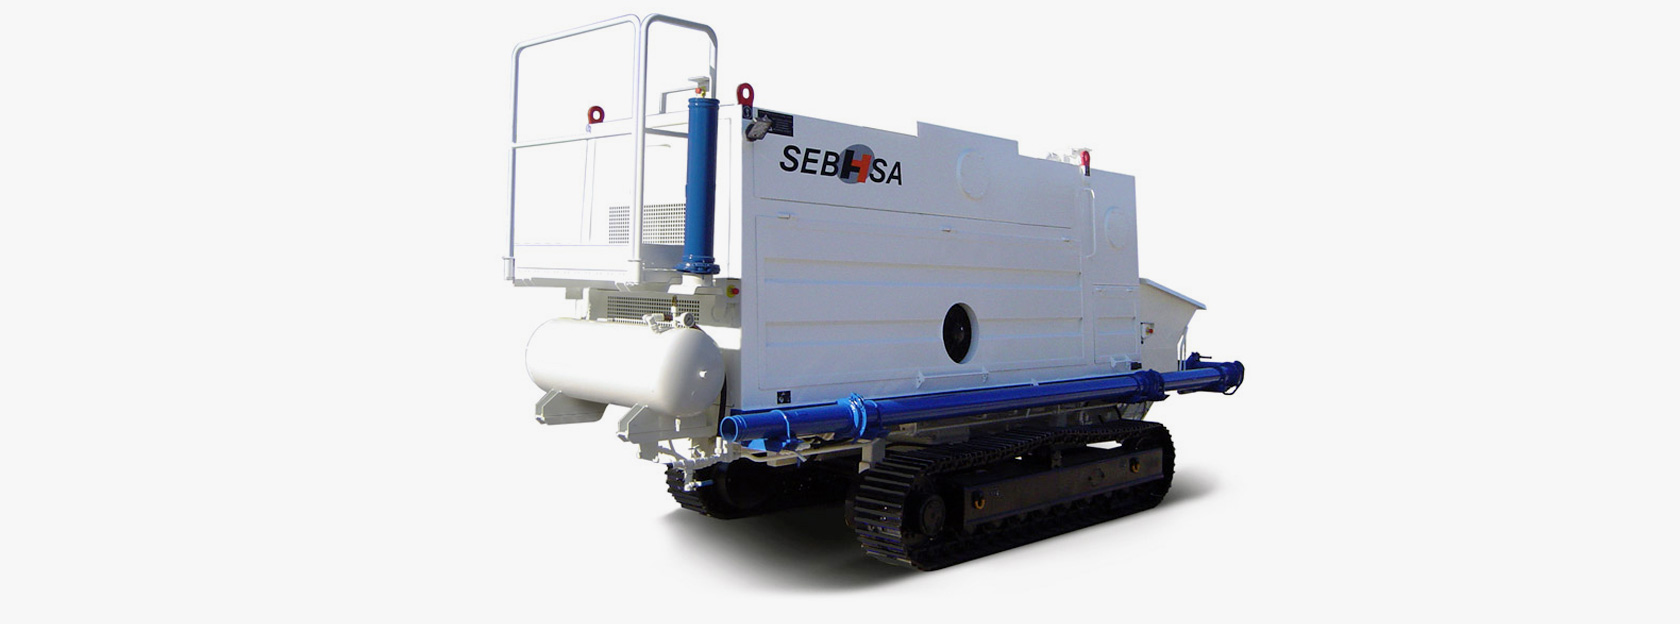 The SEBHSA BD-3117.OR tracked pump is configured to achieve maximum productivity from its highly efficient, low emission engine.